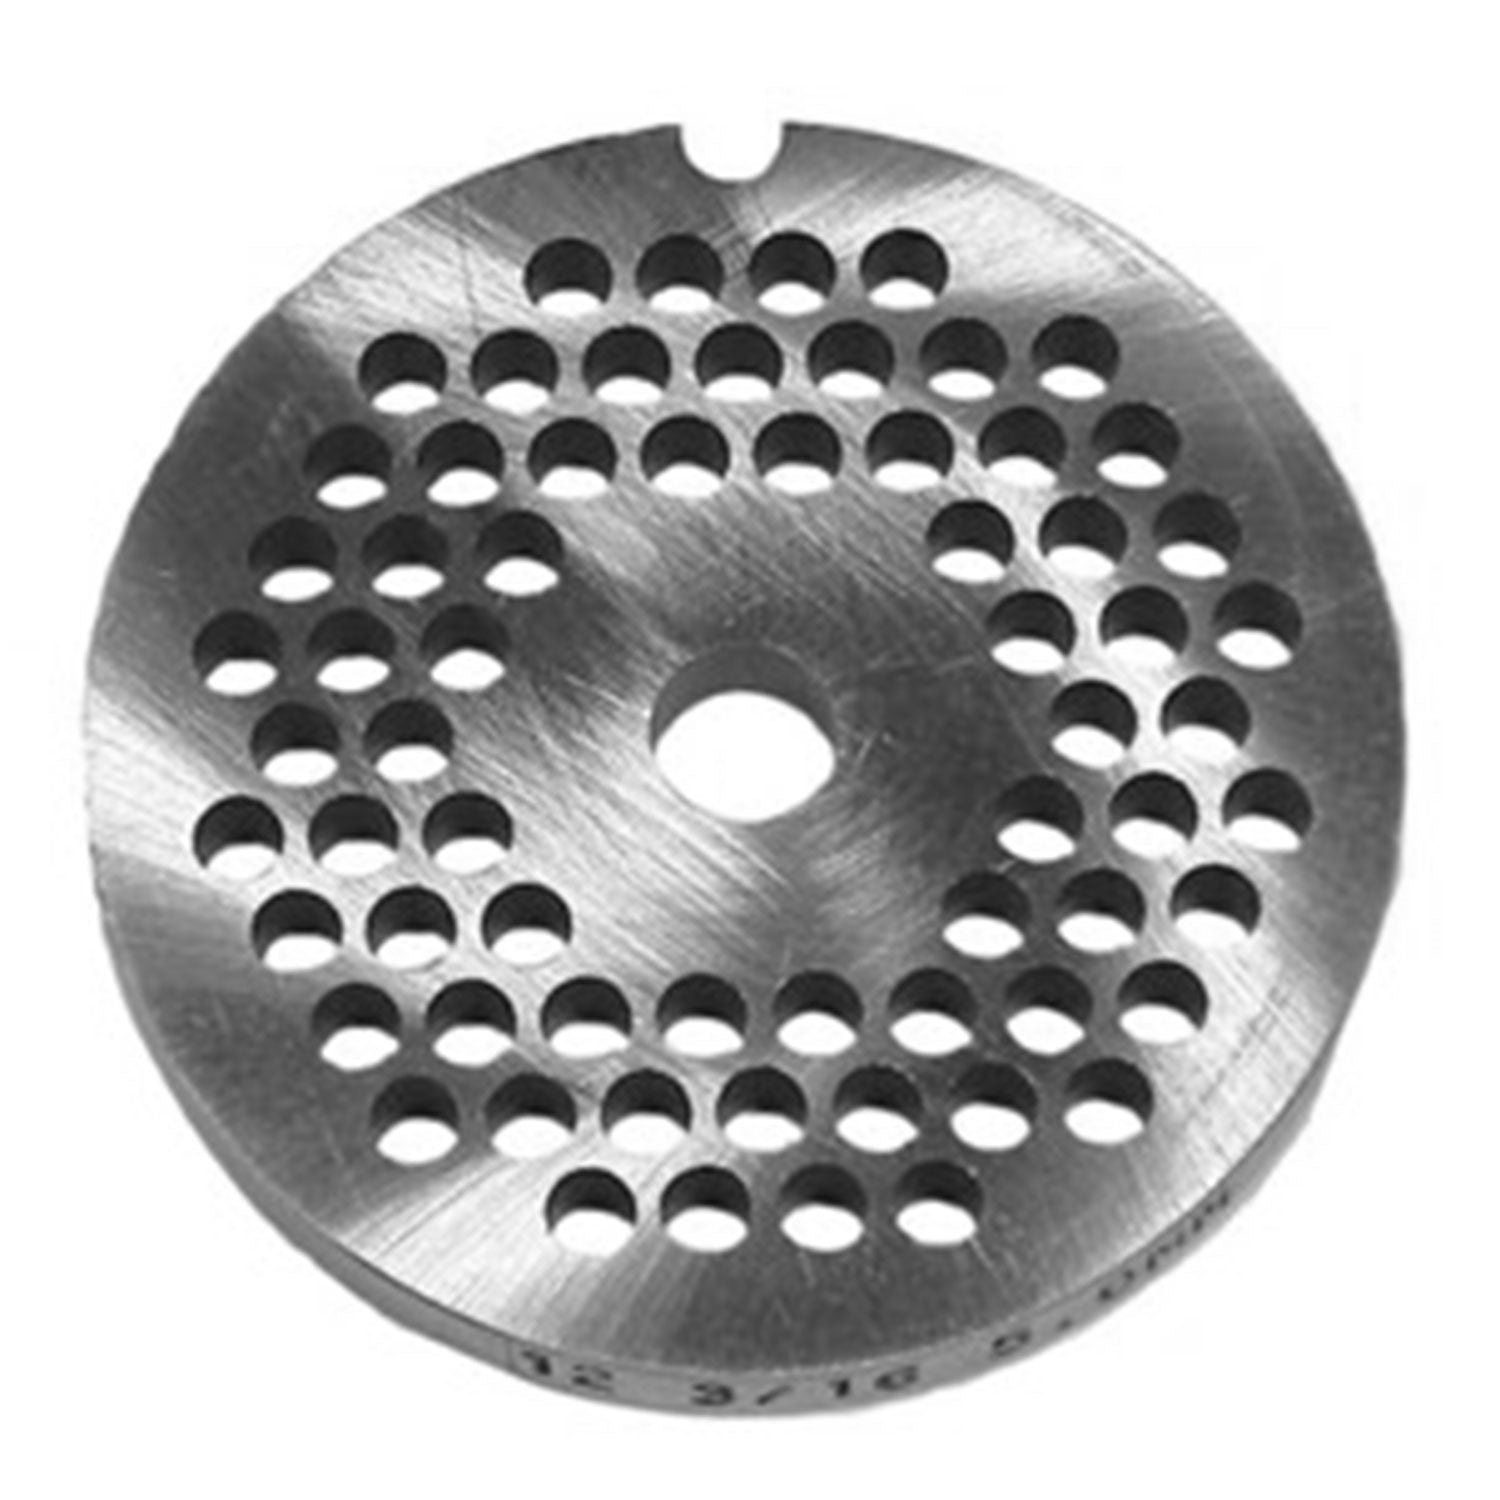 Size 12 DC Reversible Meat Grinder Plate, 3/16